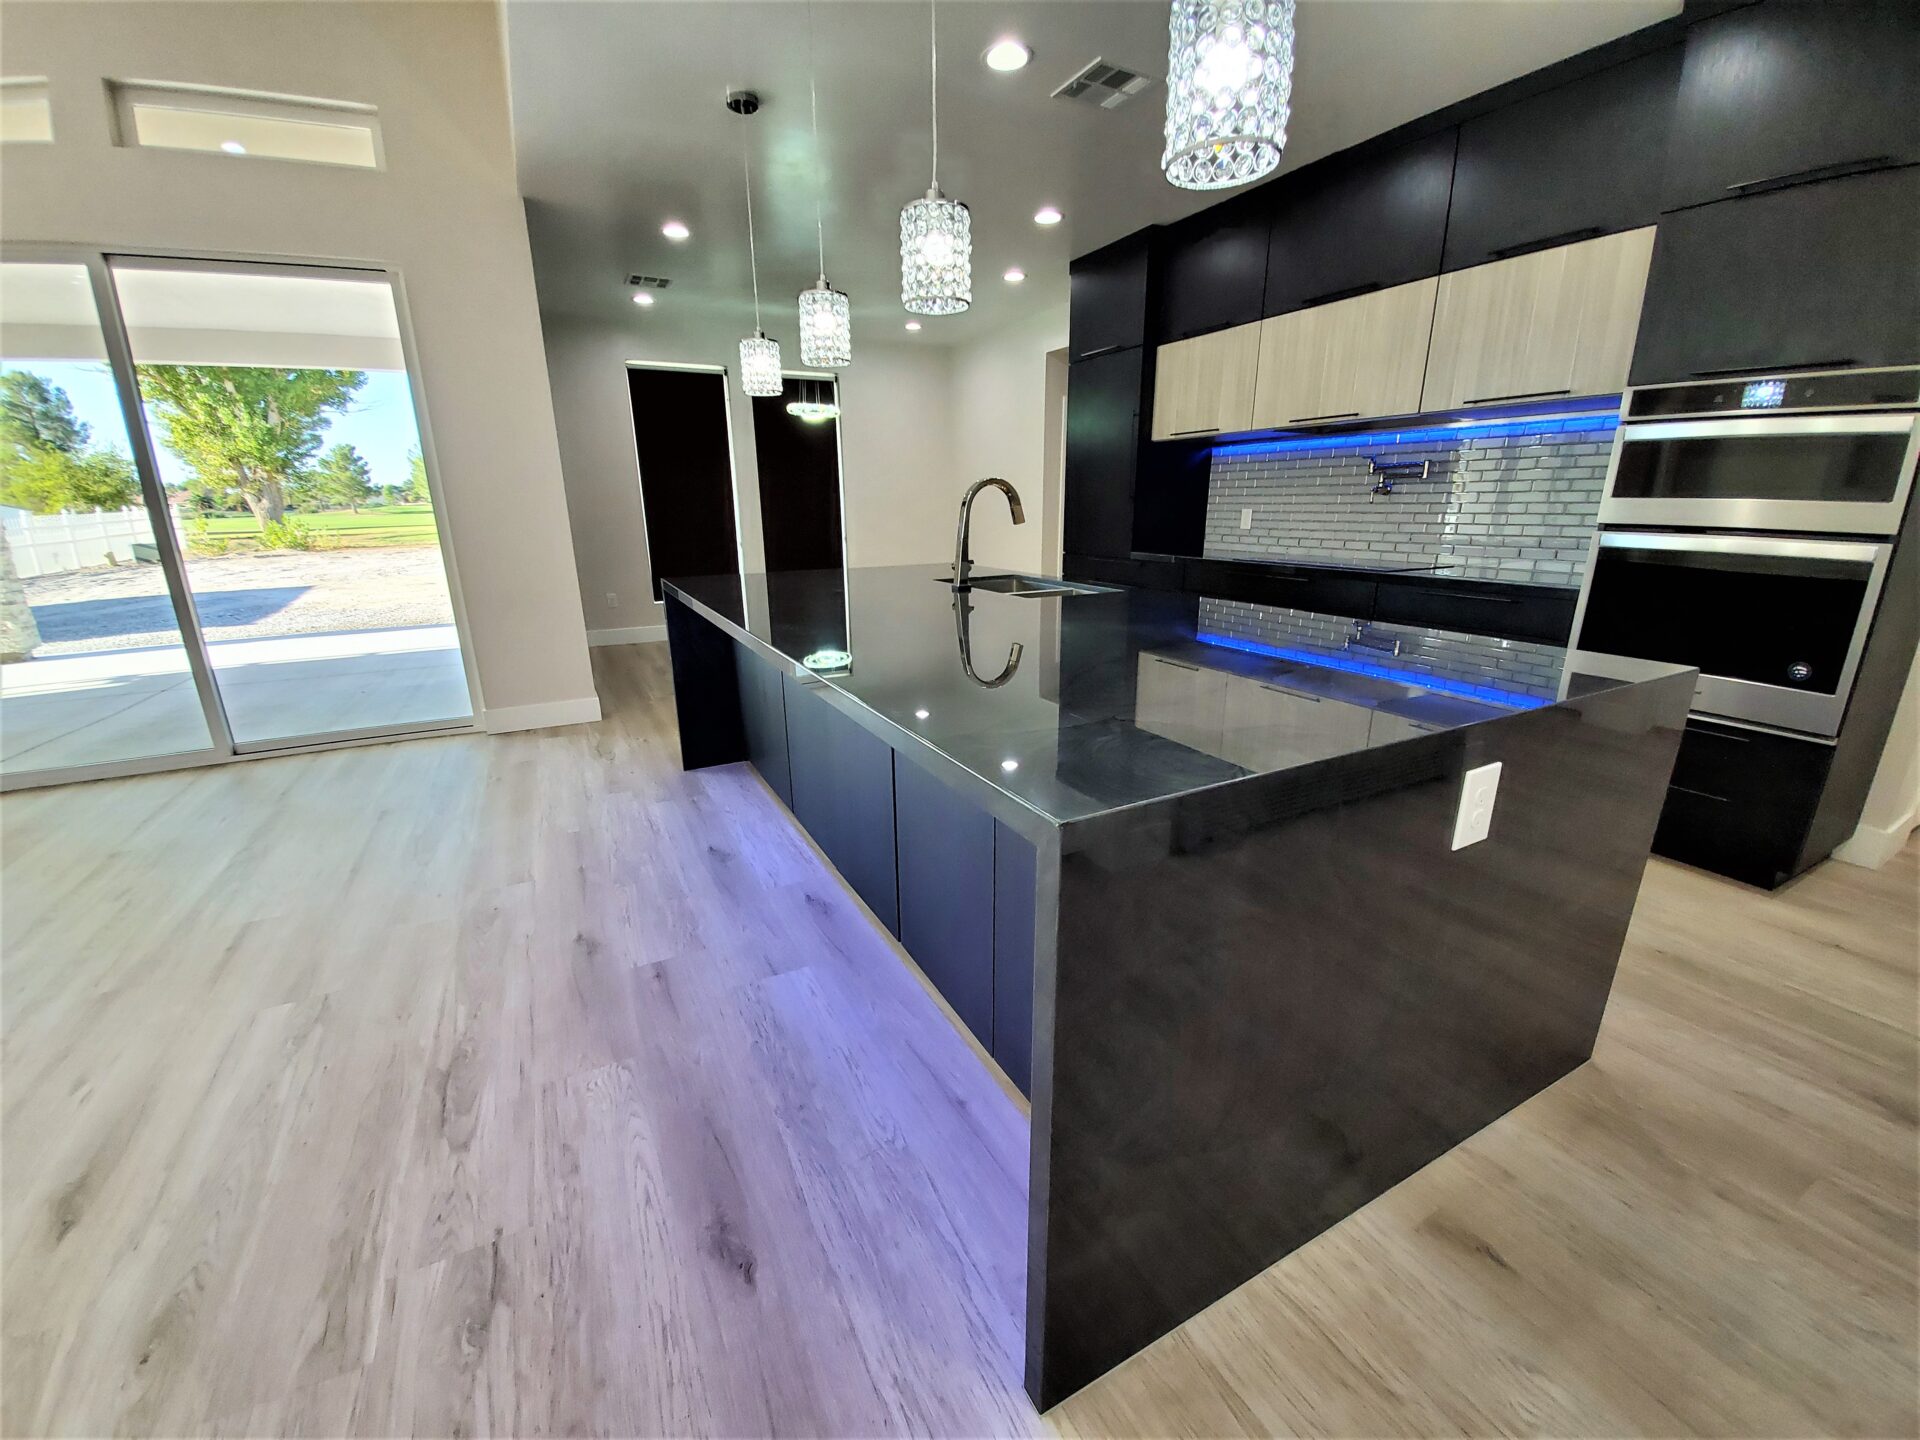 A custom designed kitchen with lights